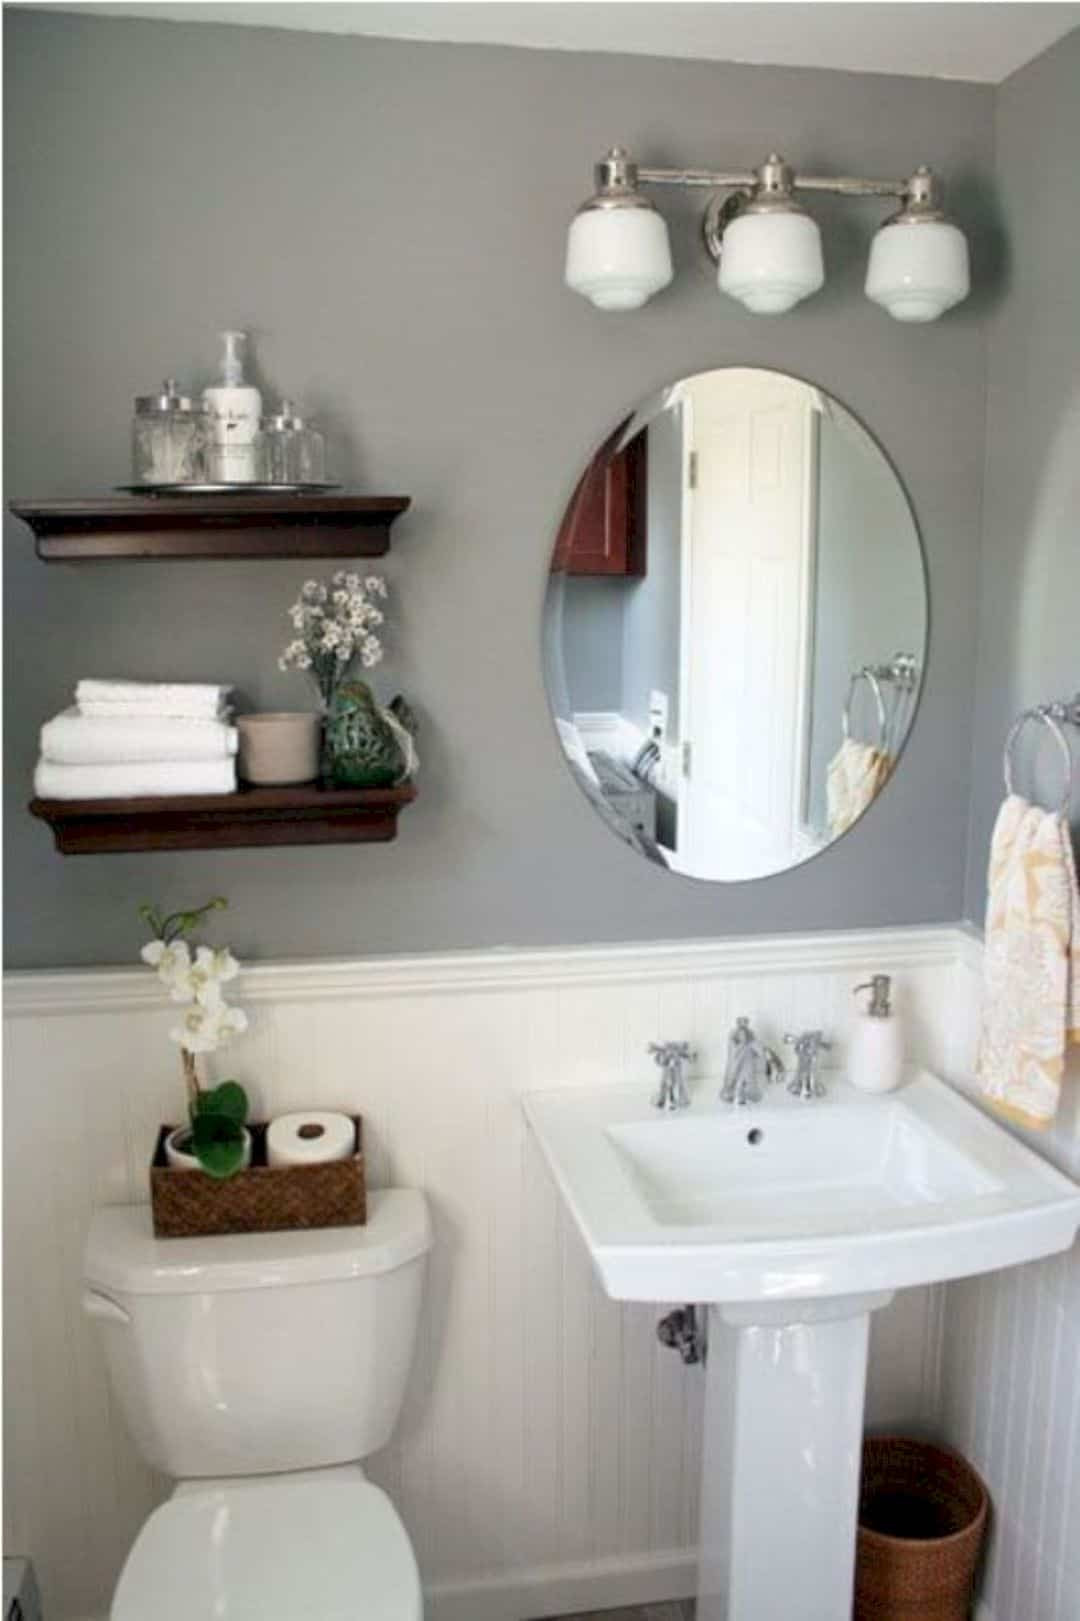 Small Bathroom Decorating Ideas
 17 Awesome Small Bathroom Decorating Ideas